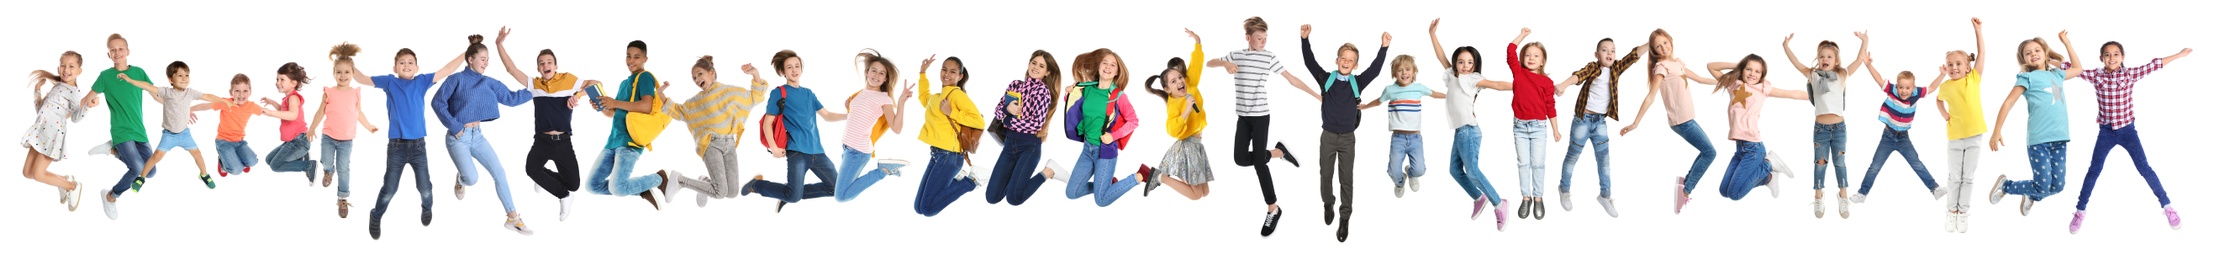 Image of Collage with photosjumping children on white background. Banner design